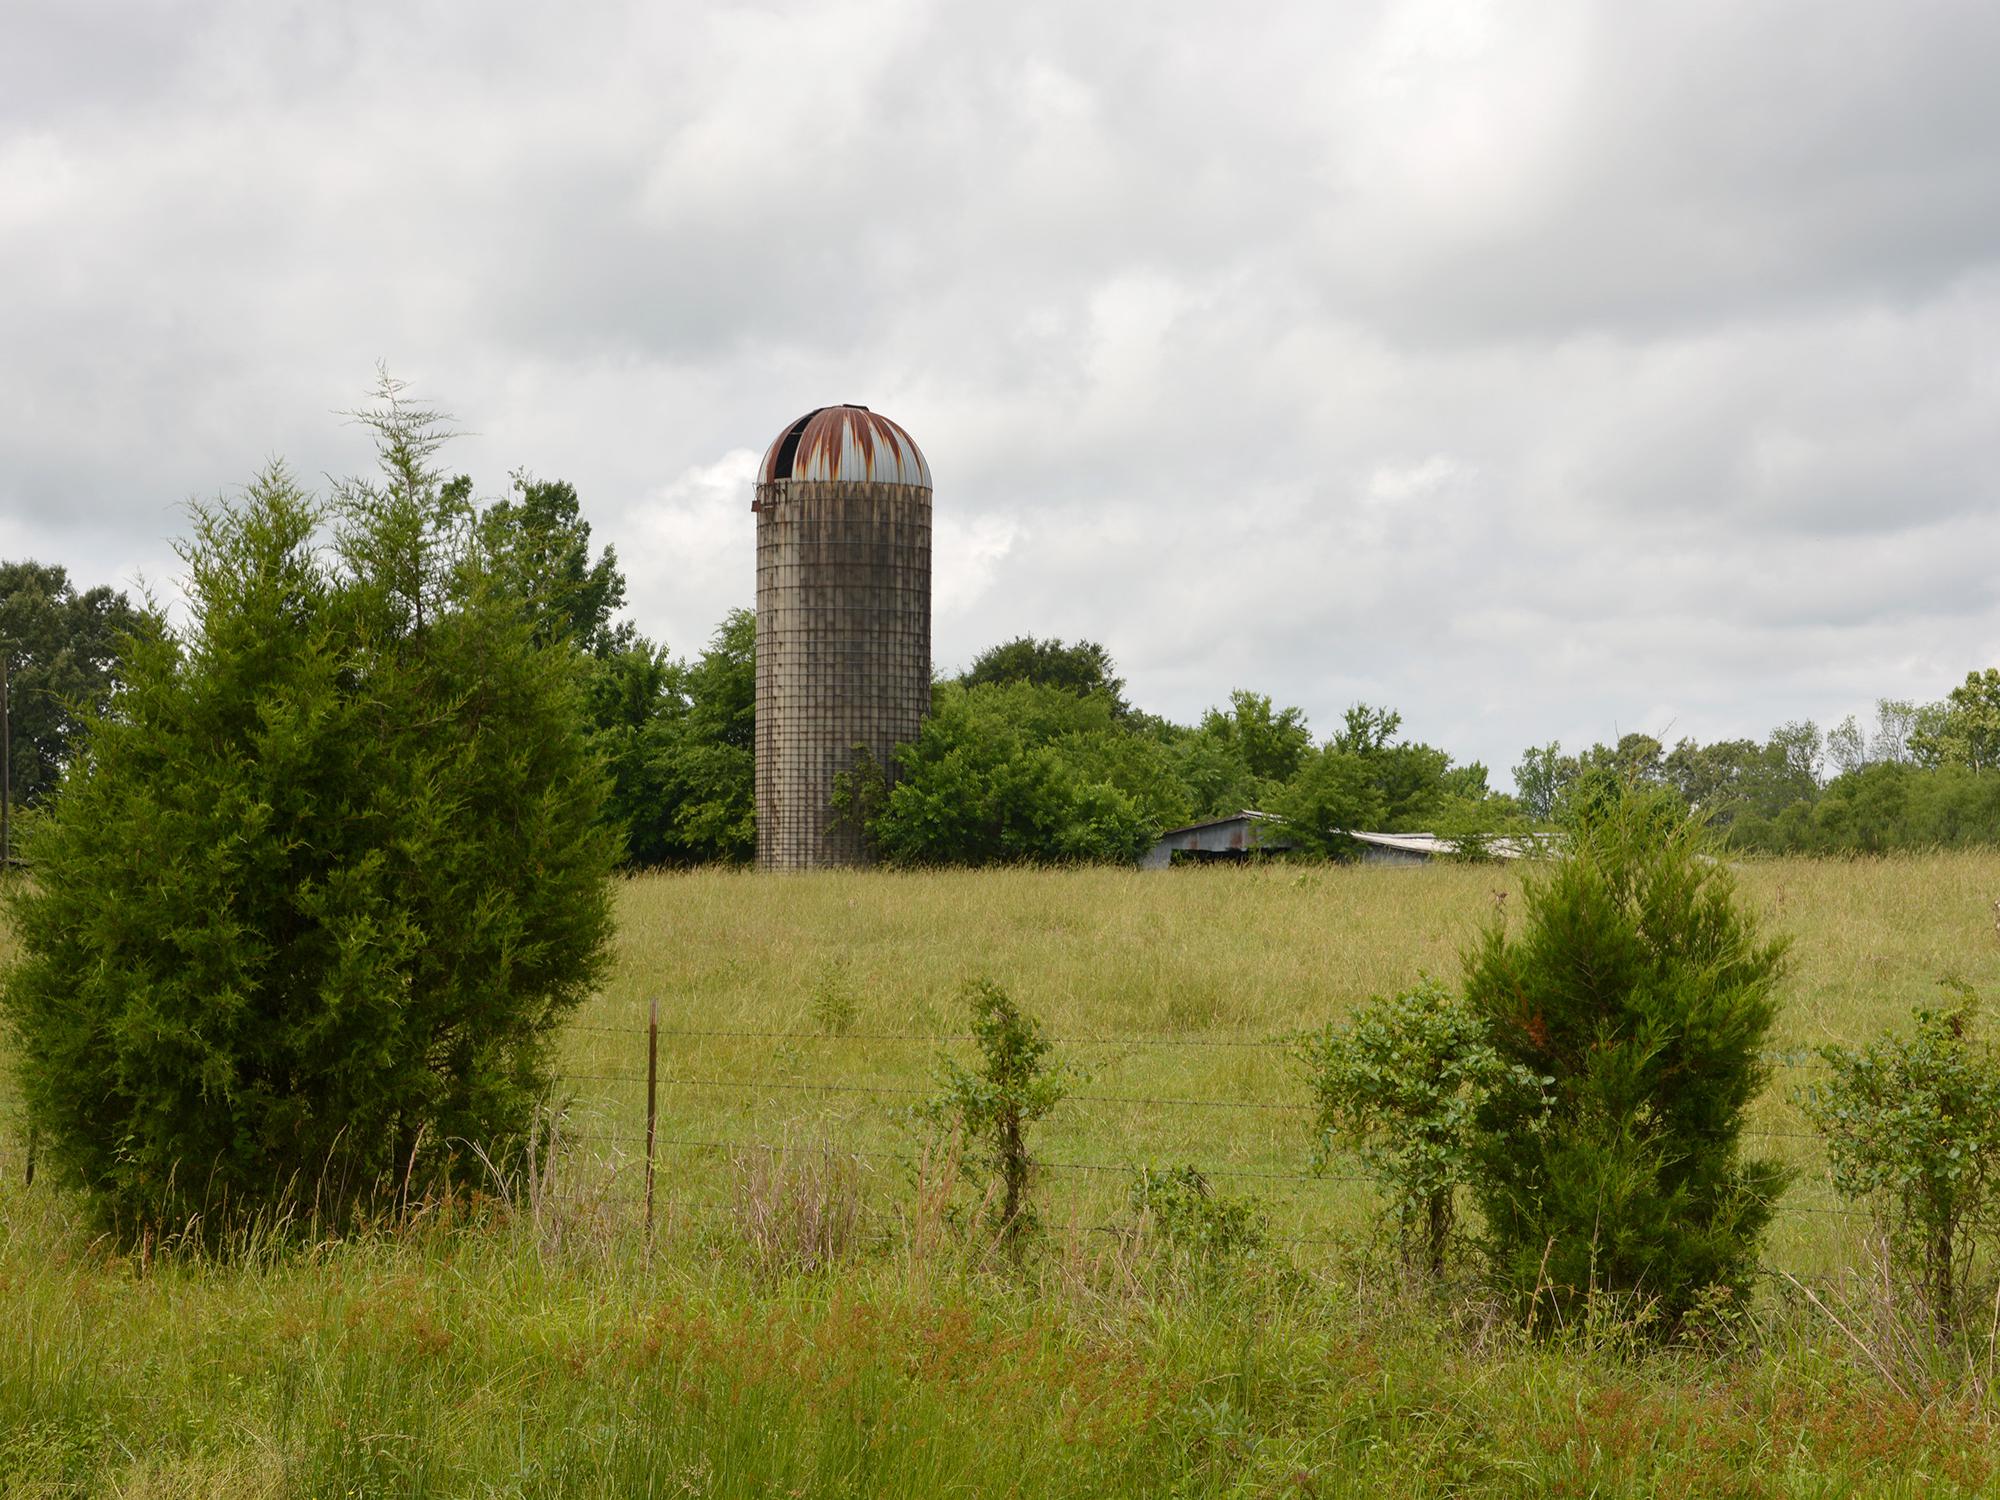 Abandoned corn silage silos dot the Mississippi countryside as towering monuments marking the locations of former dairy farms like this one in Oktibbeha County on May 30, 2014. (Photo by MSU Ag Communications/Linda Breazeale)